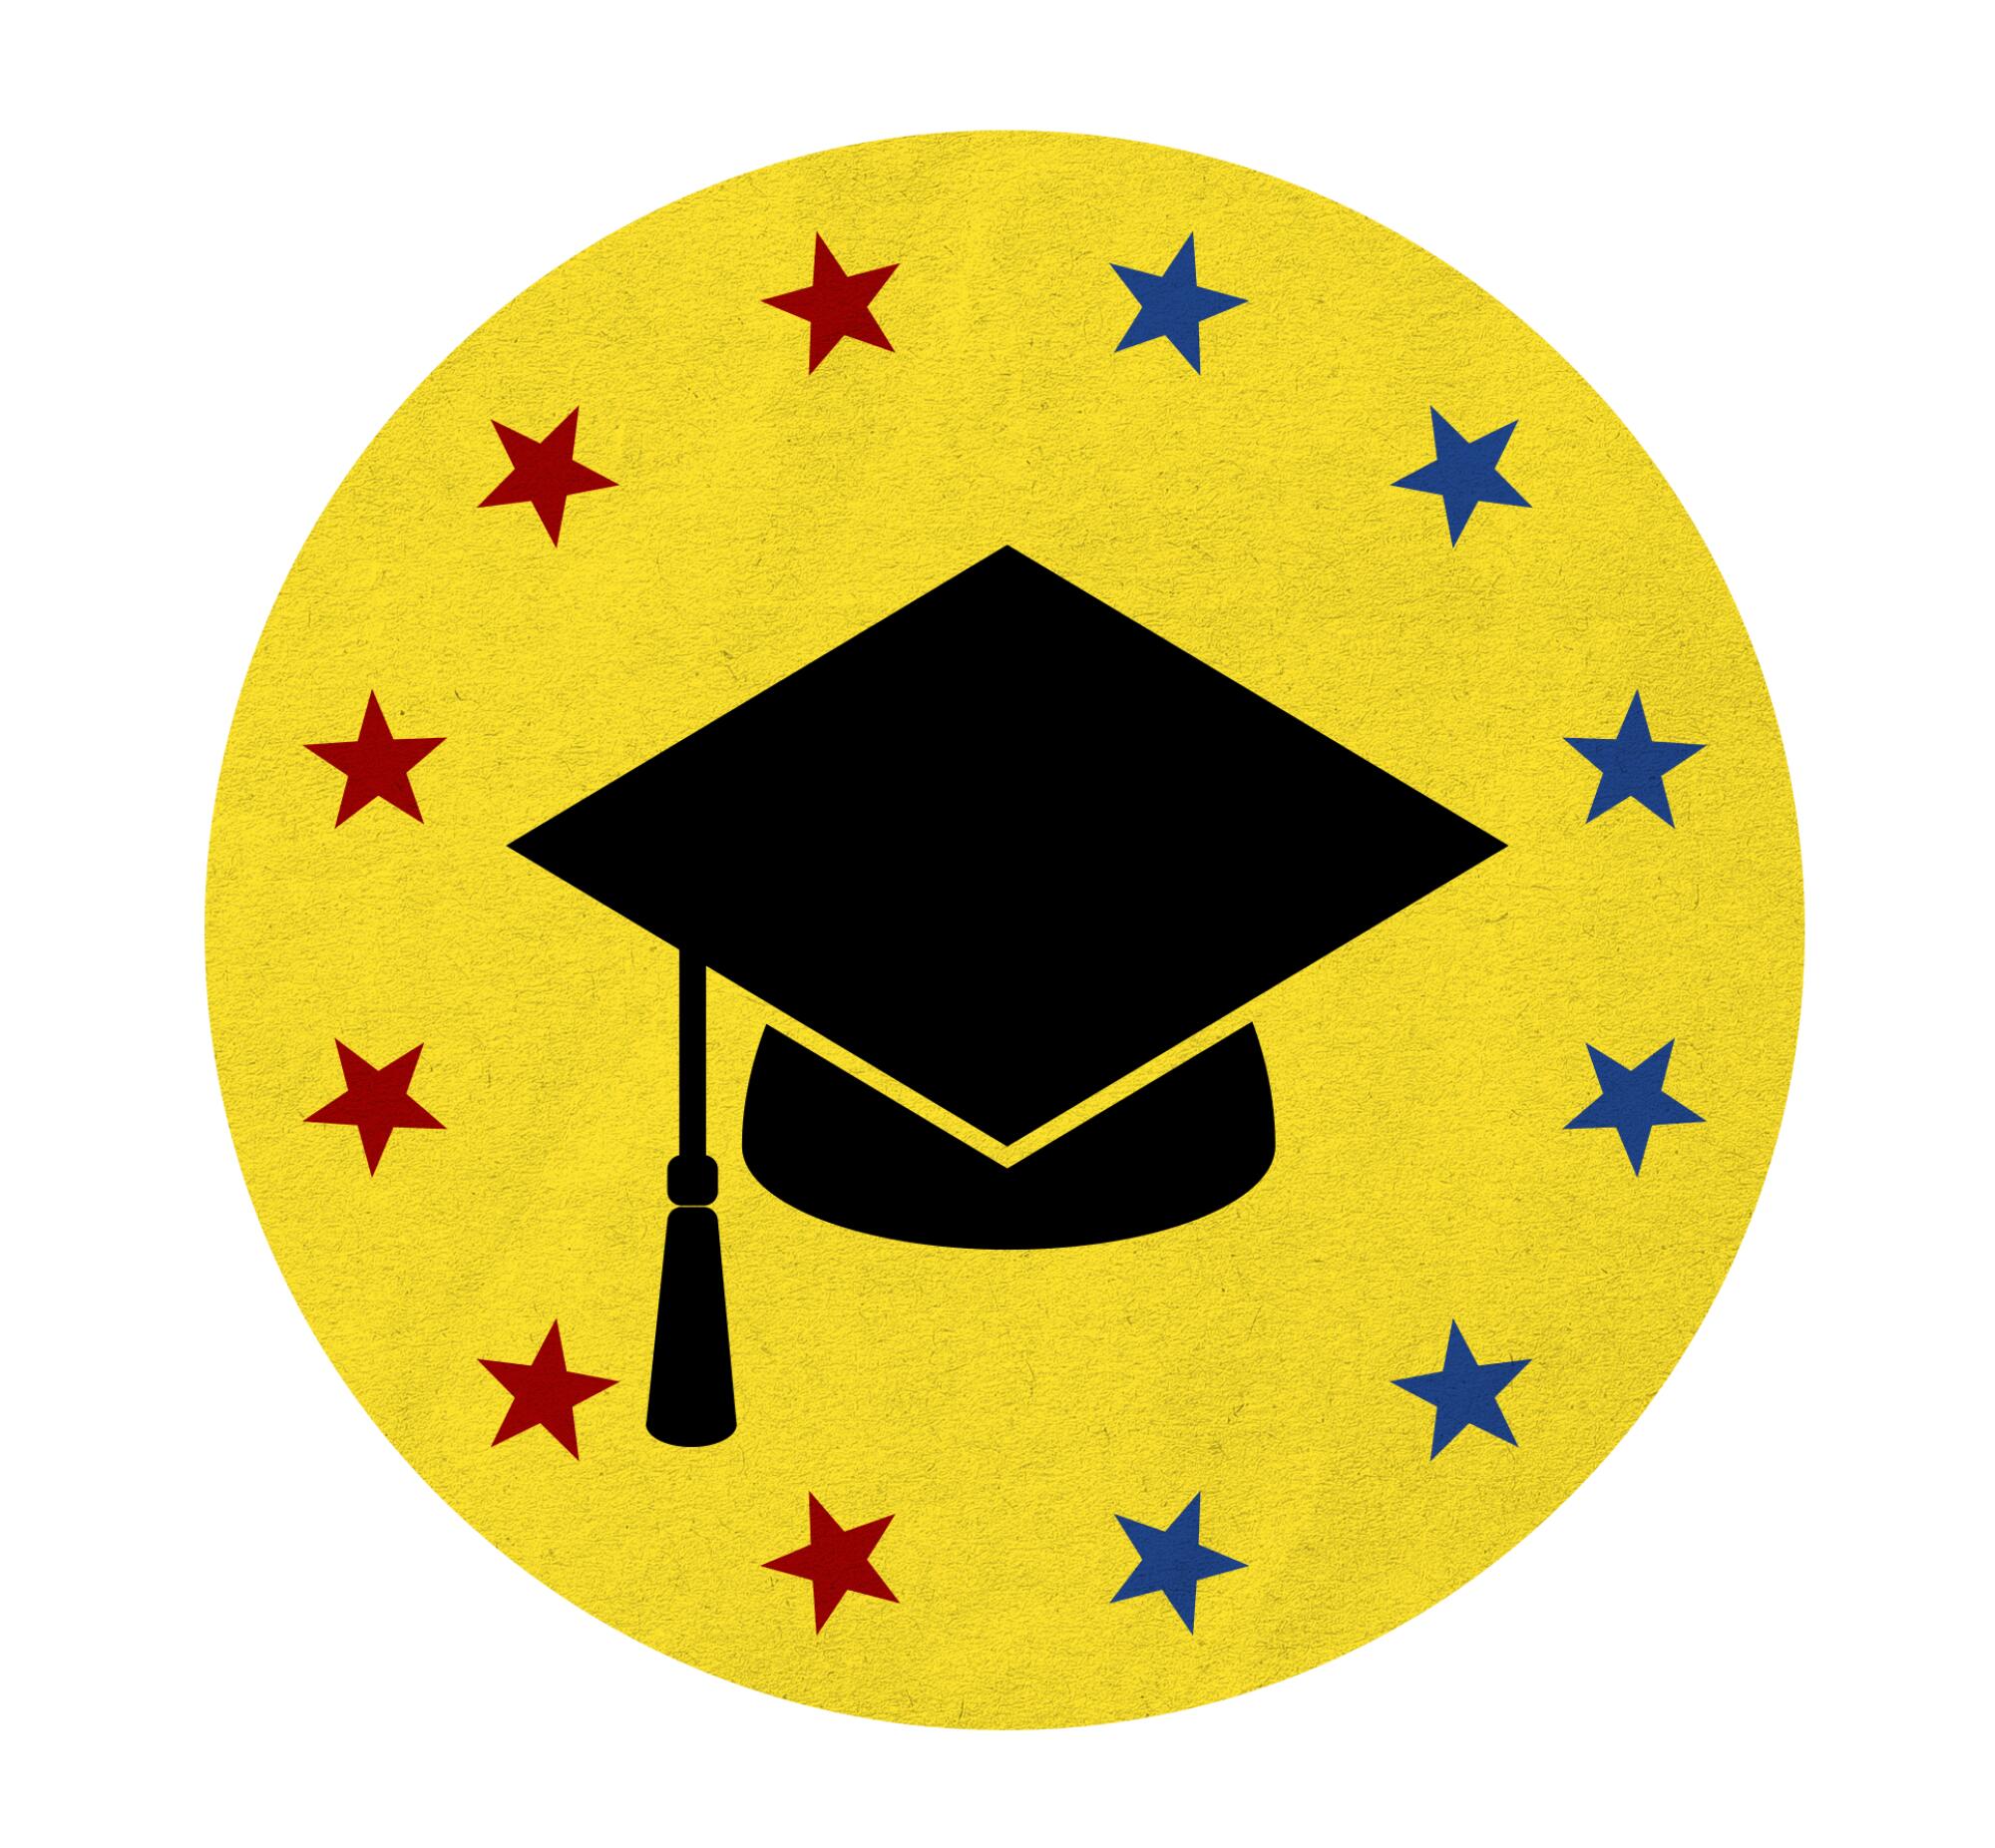 graduation cap in a yellow circle with red and blue stars